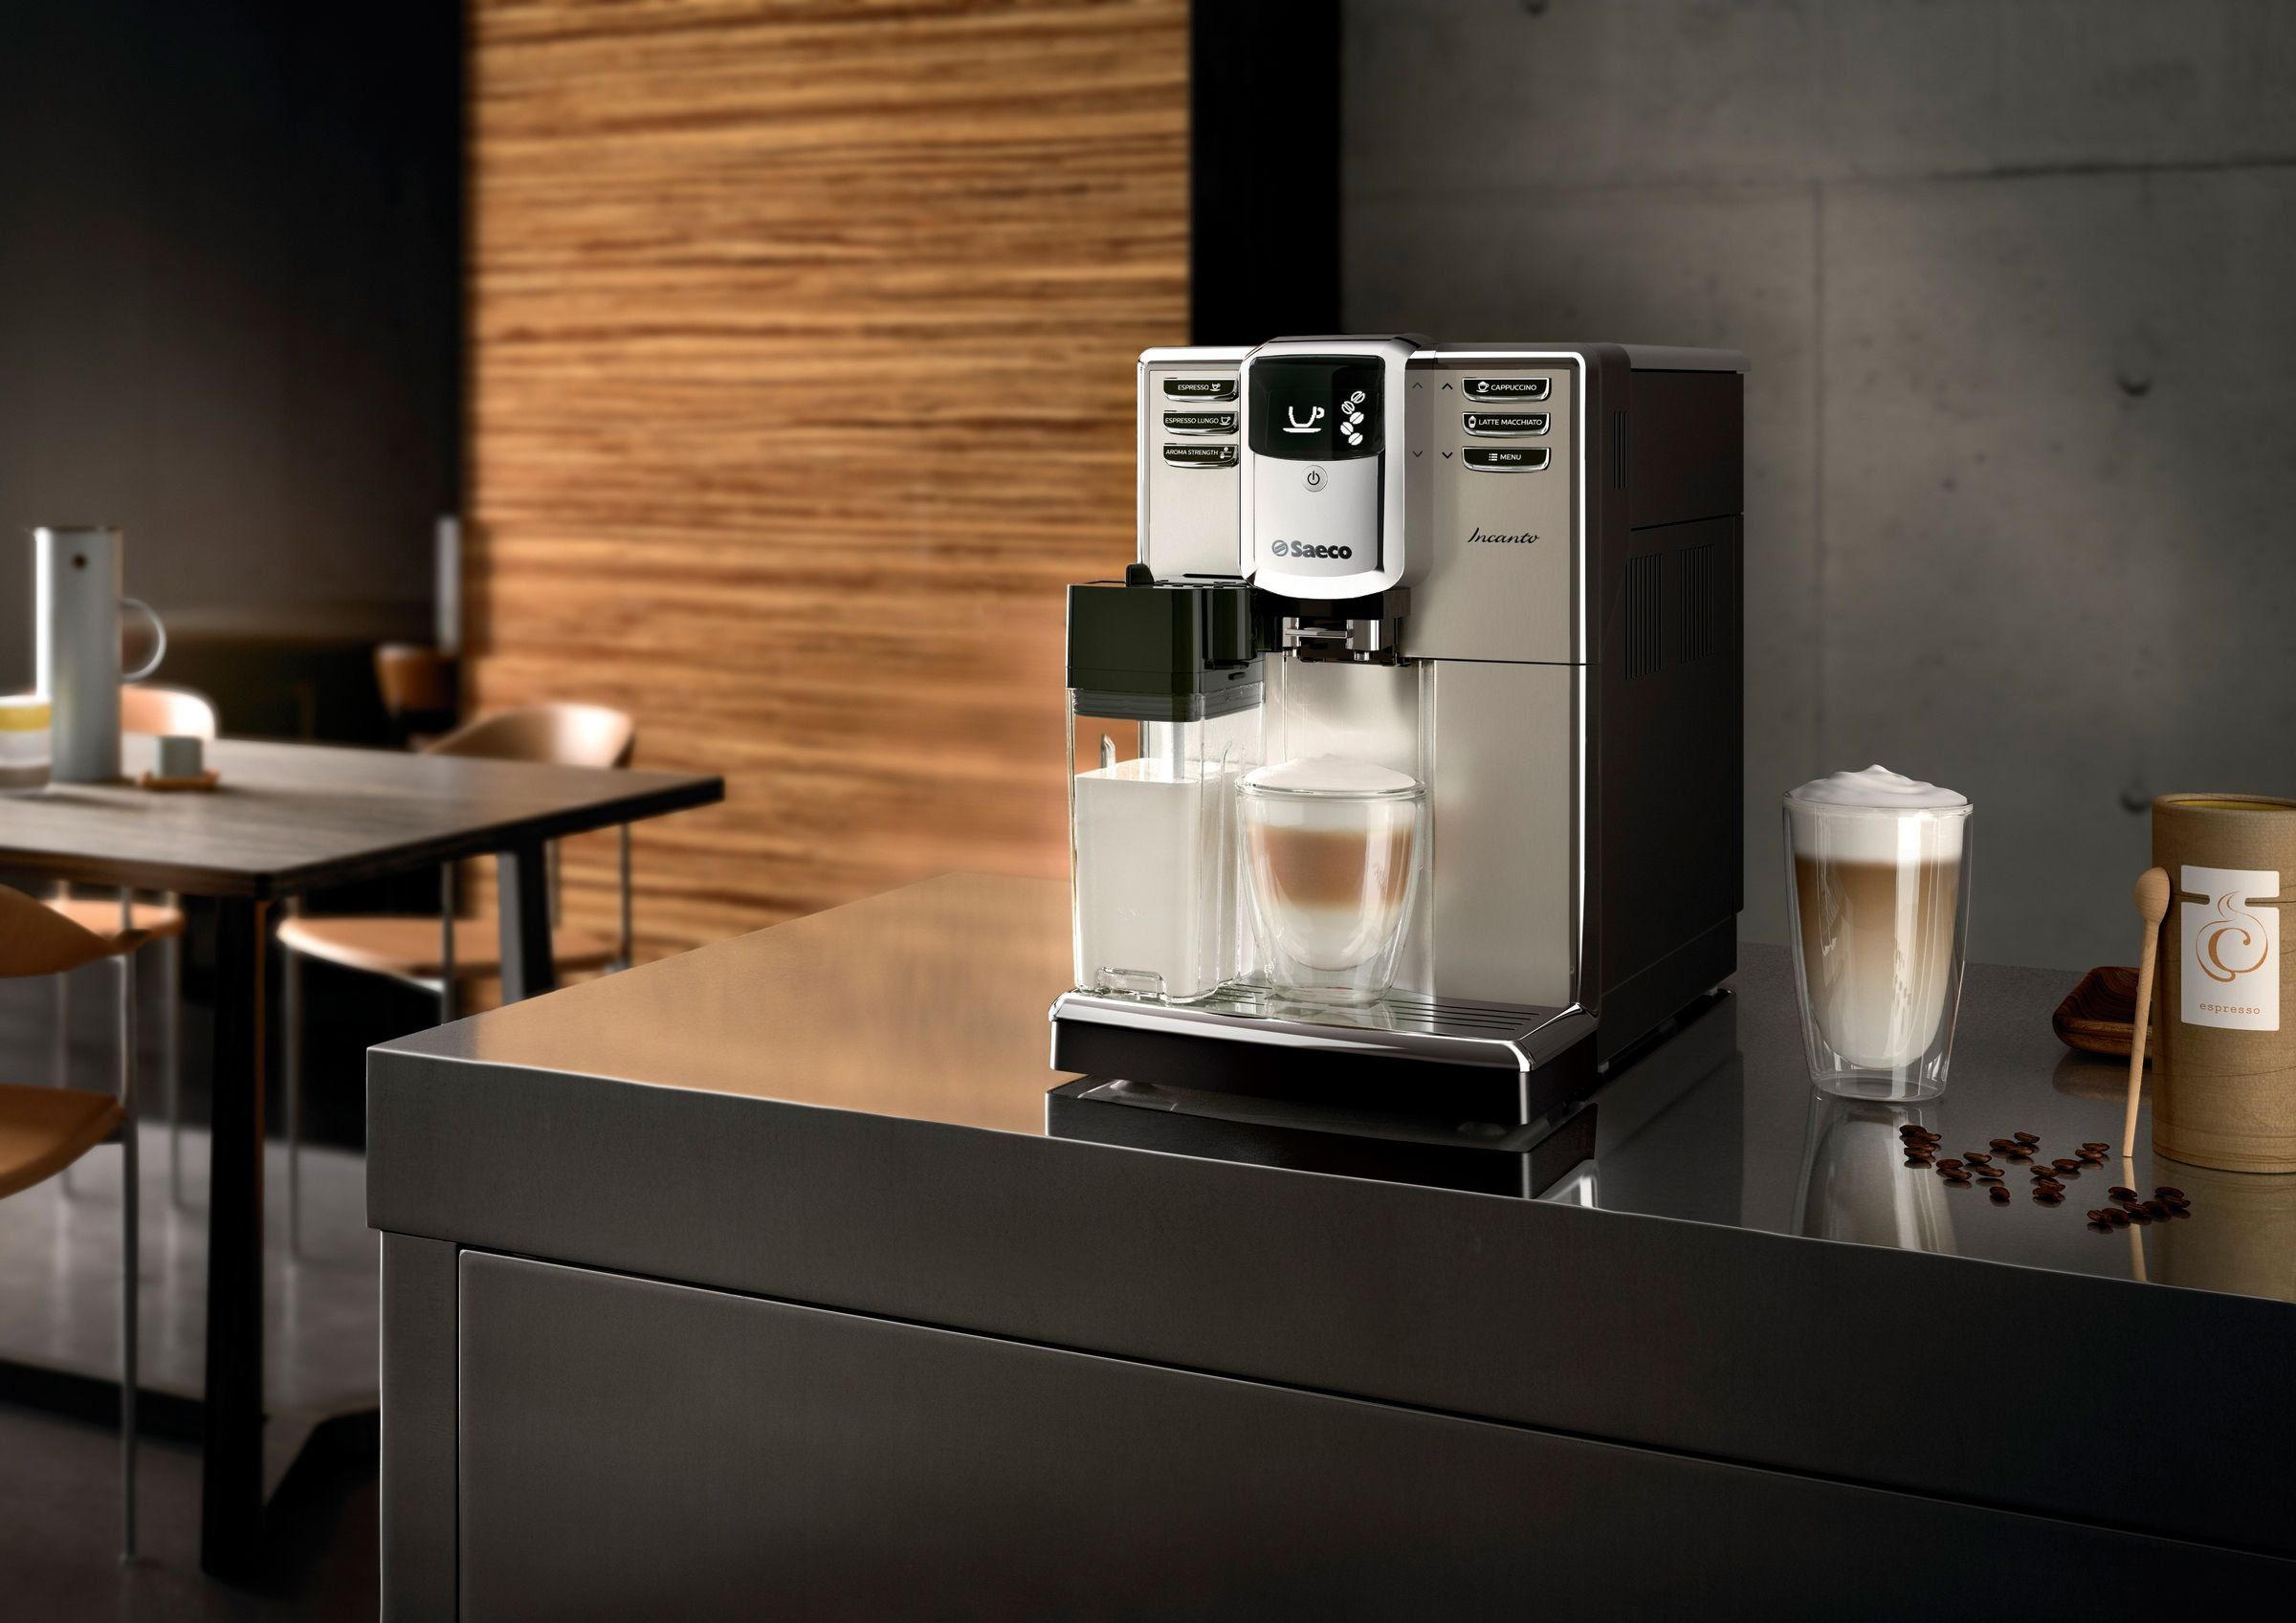 Best Saeco espresso machines for home and office 2020